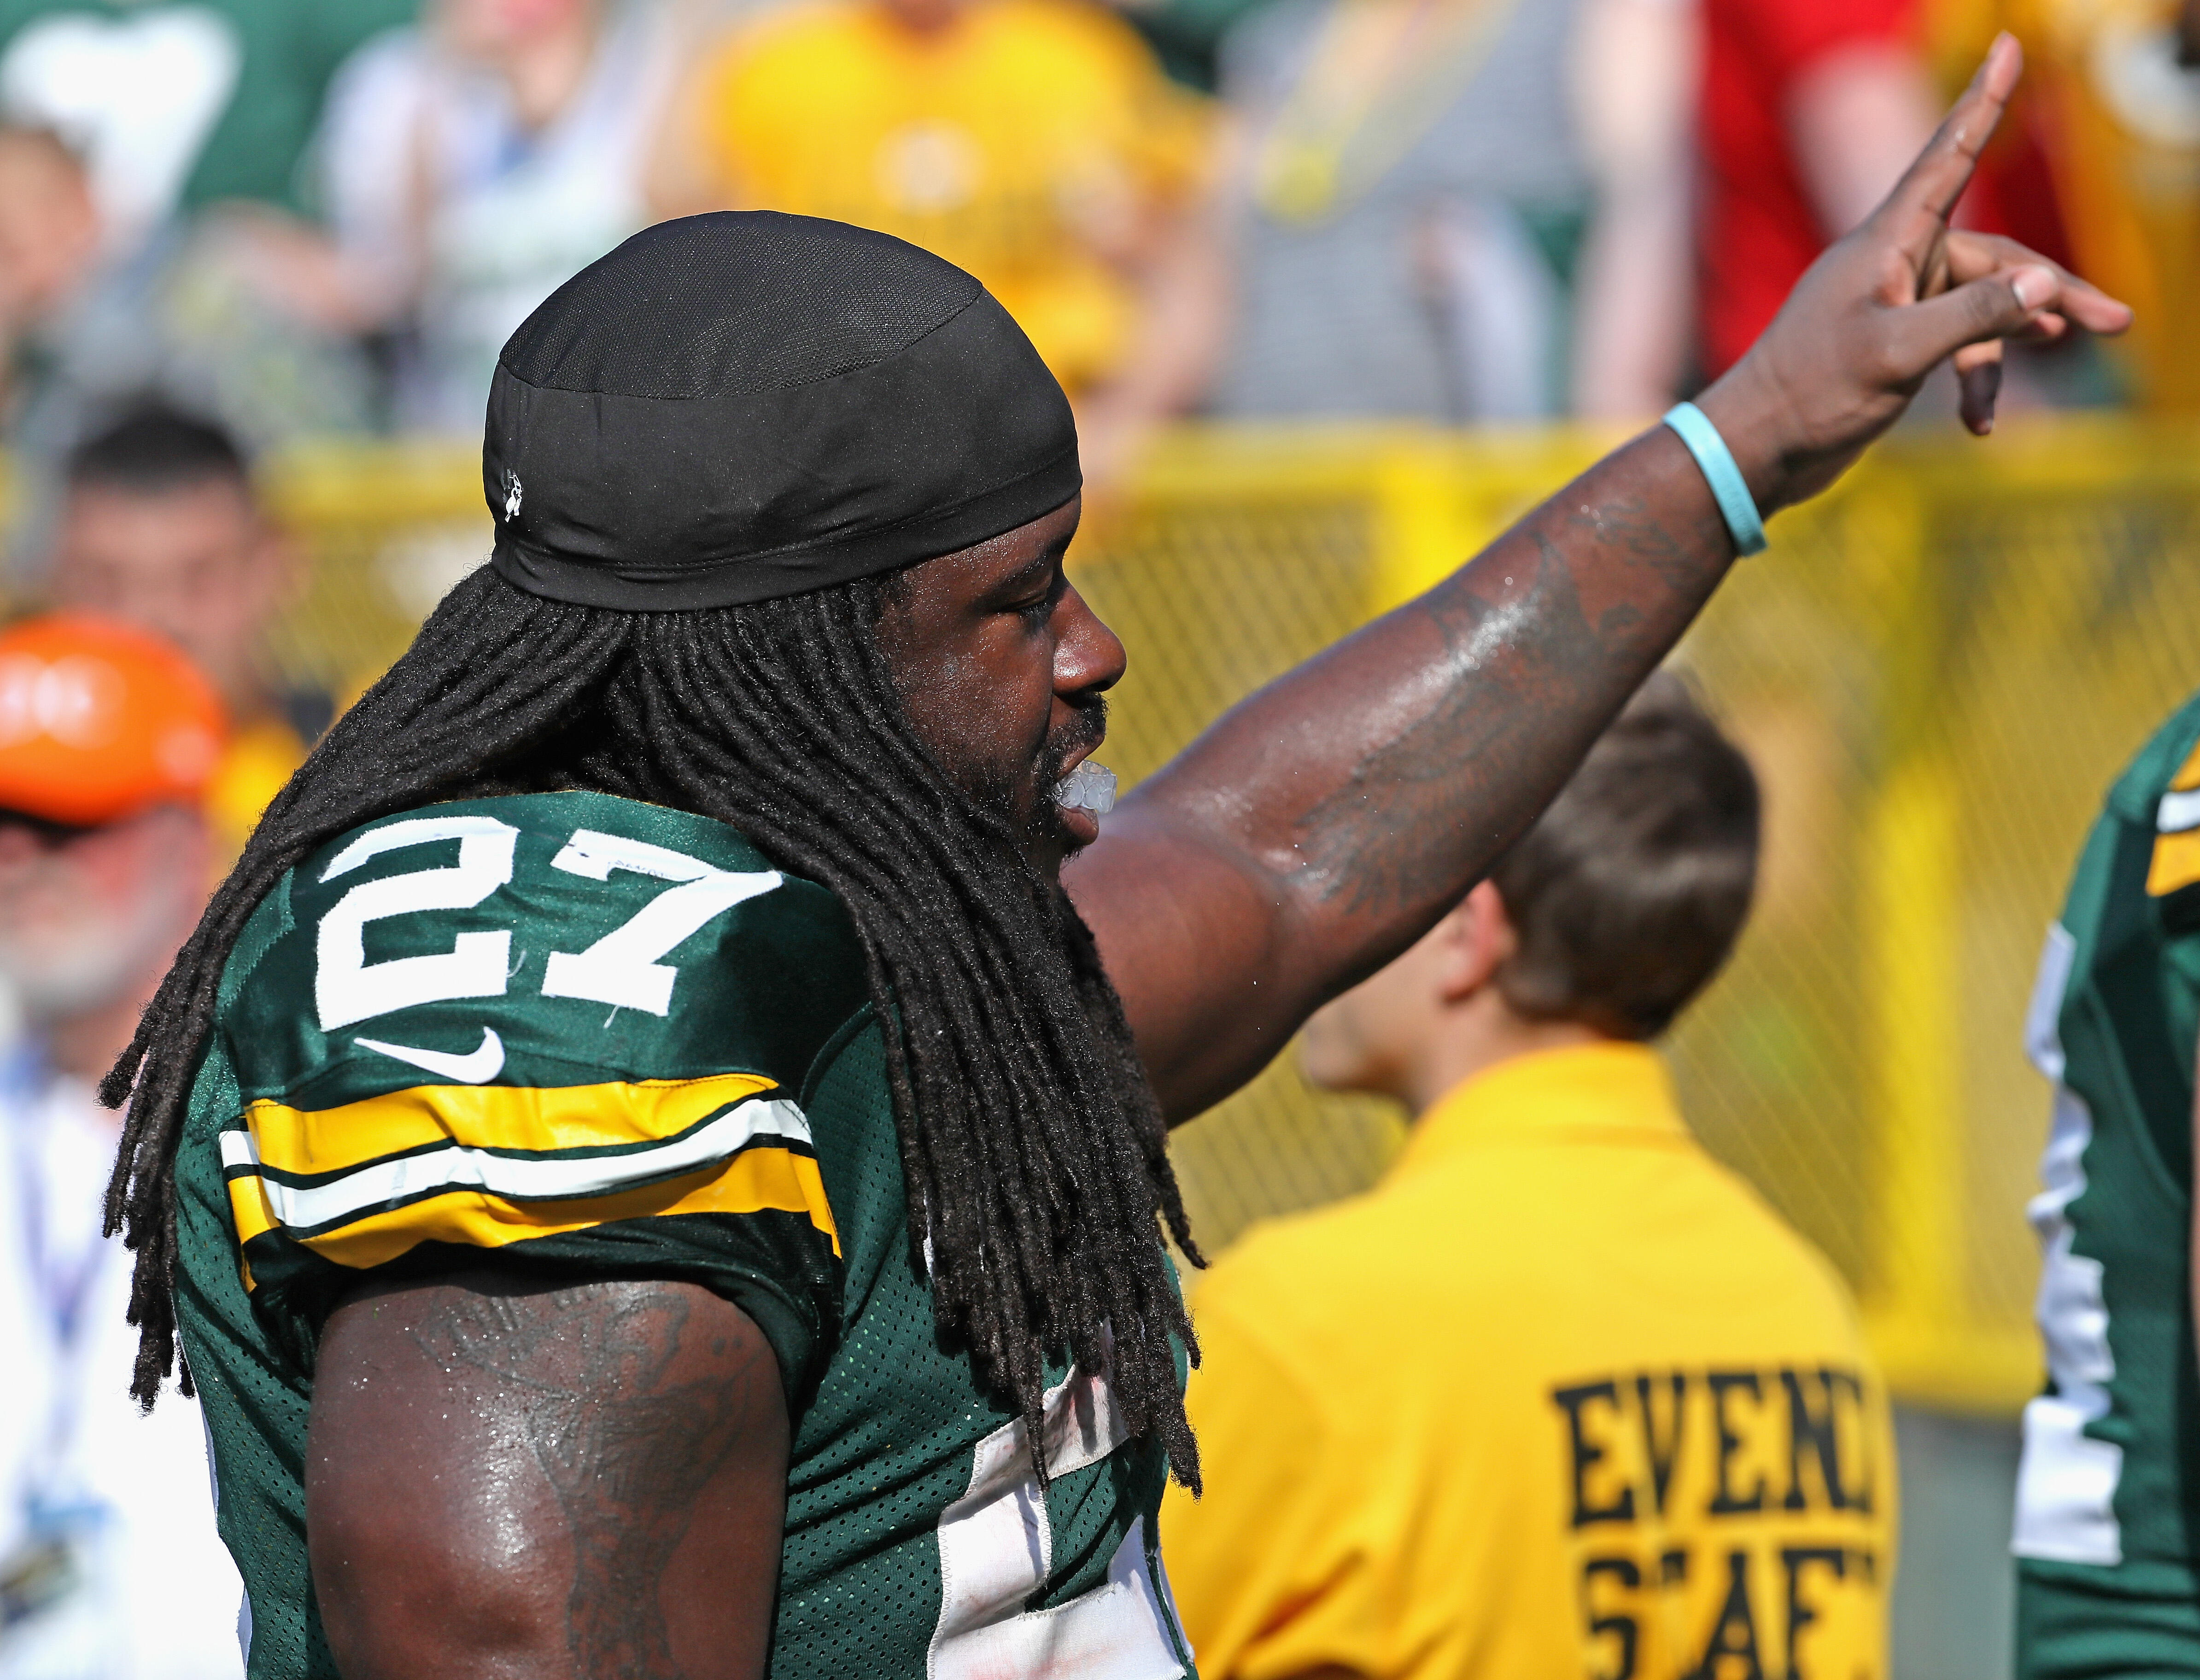 GREEN BAY, WI - SEPTEMBER 25: Eddie Lacy #27 of the Green Bay Packers acknowledges the fans as he leaves the field after a win over the Detroit Lions at Lambeau Field on September 25, 2016 in Green Bay, Wisconsin. The Packers defeated the Lions 34-27. (Ph